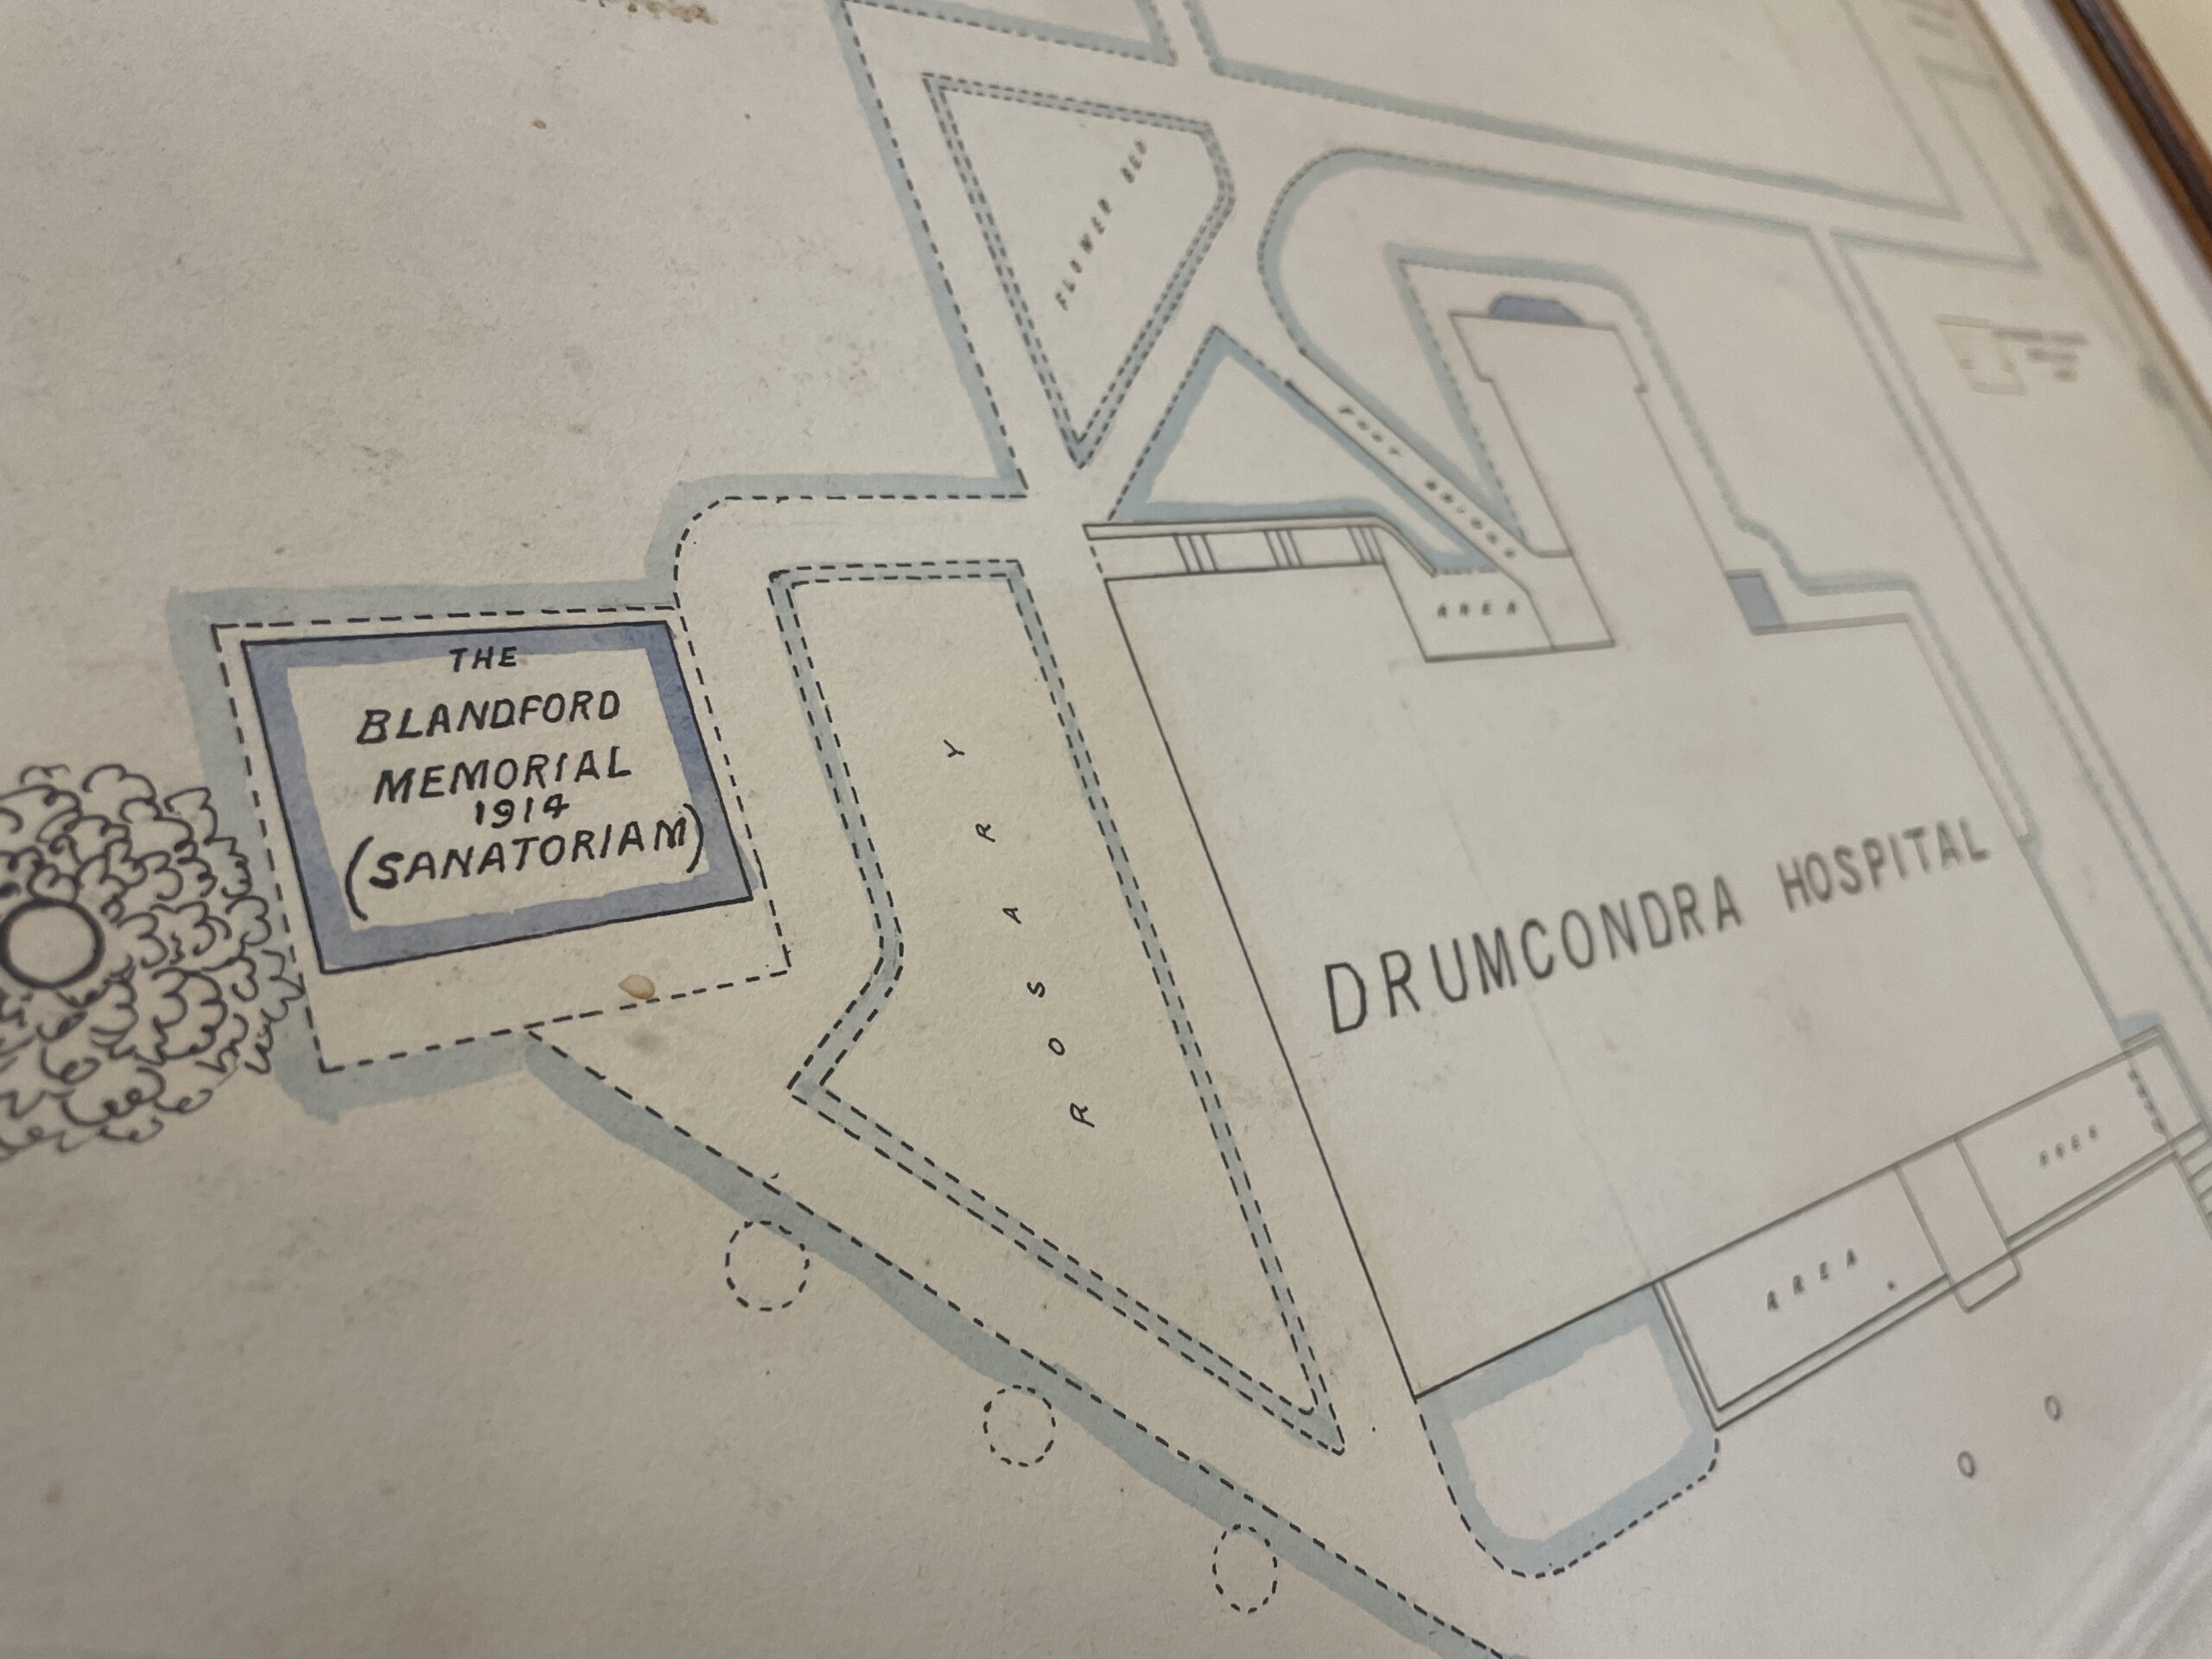 A historical plan of the site describes an early arrangement of the hospital building and surrounding outbuildings.